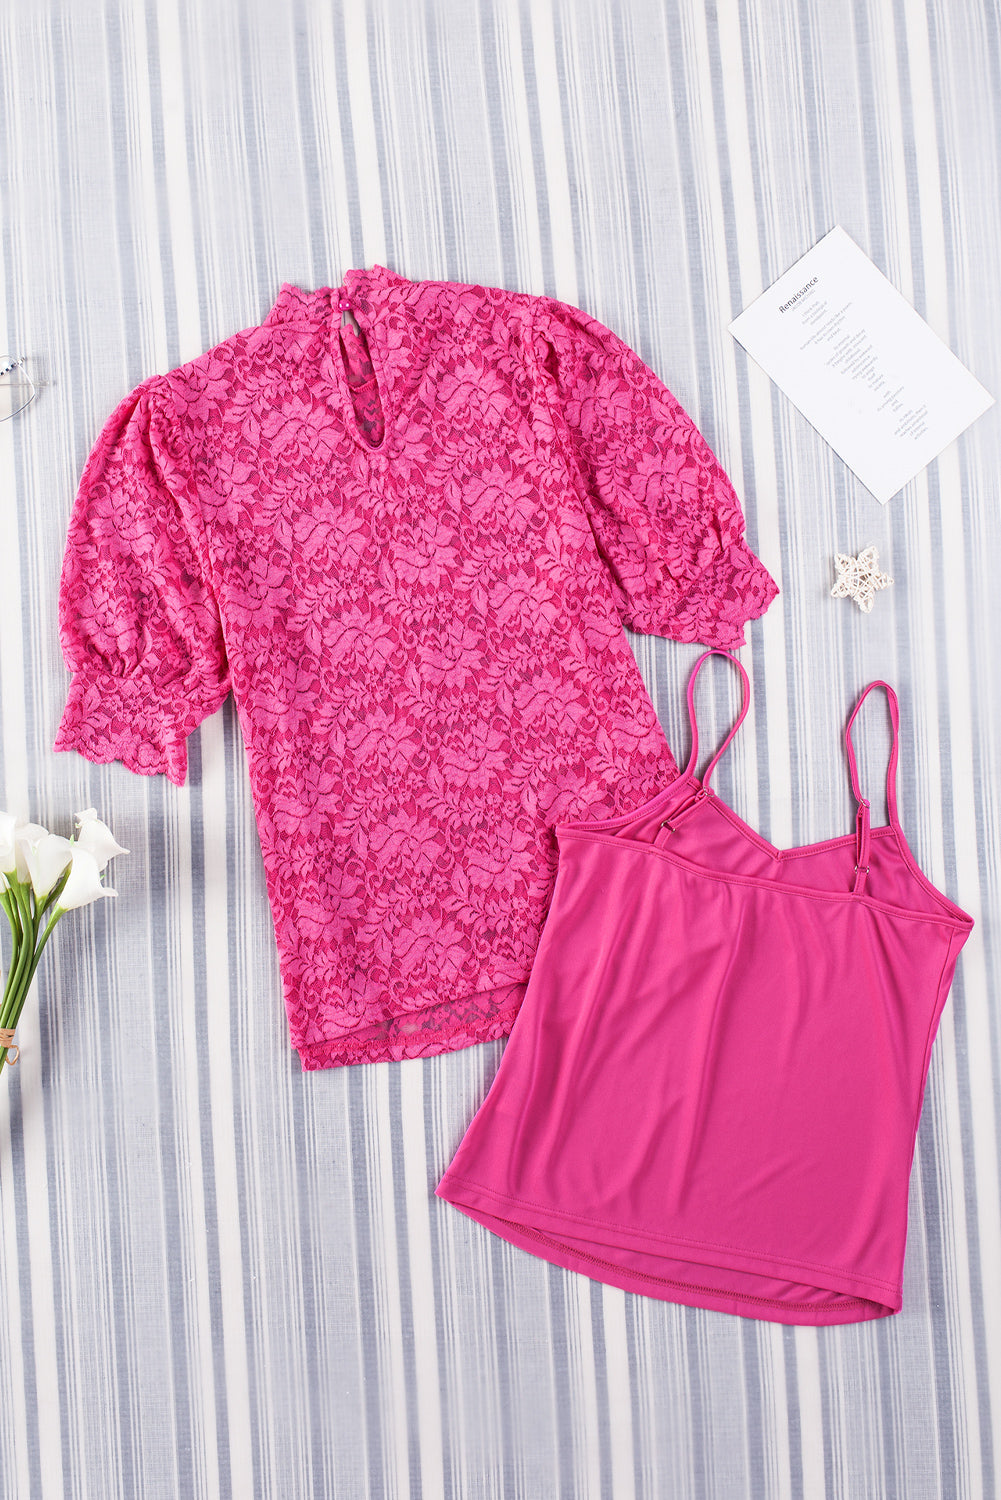 Pink High Neck Lace Short Sleeve Top